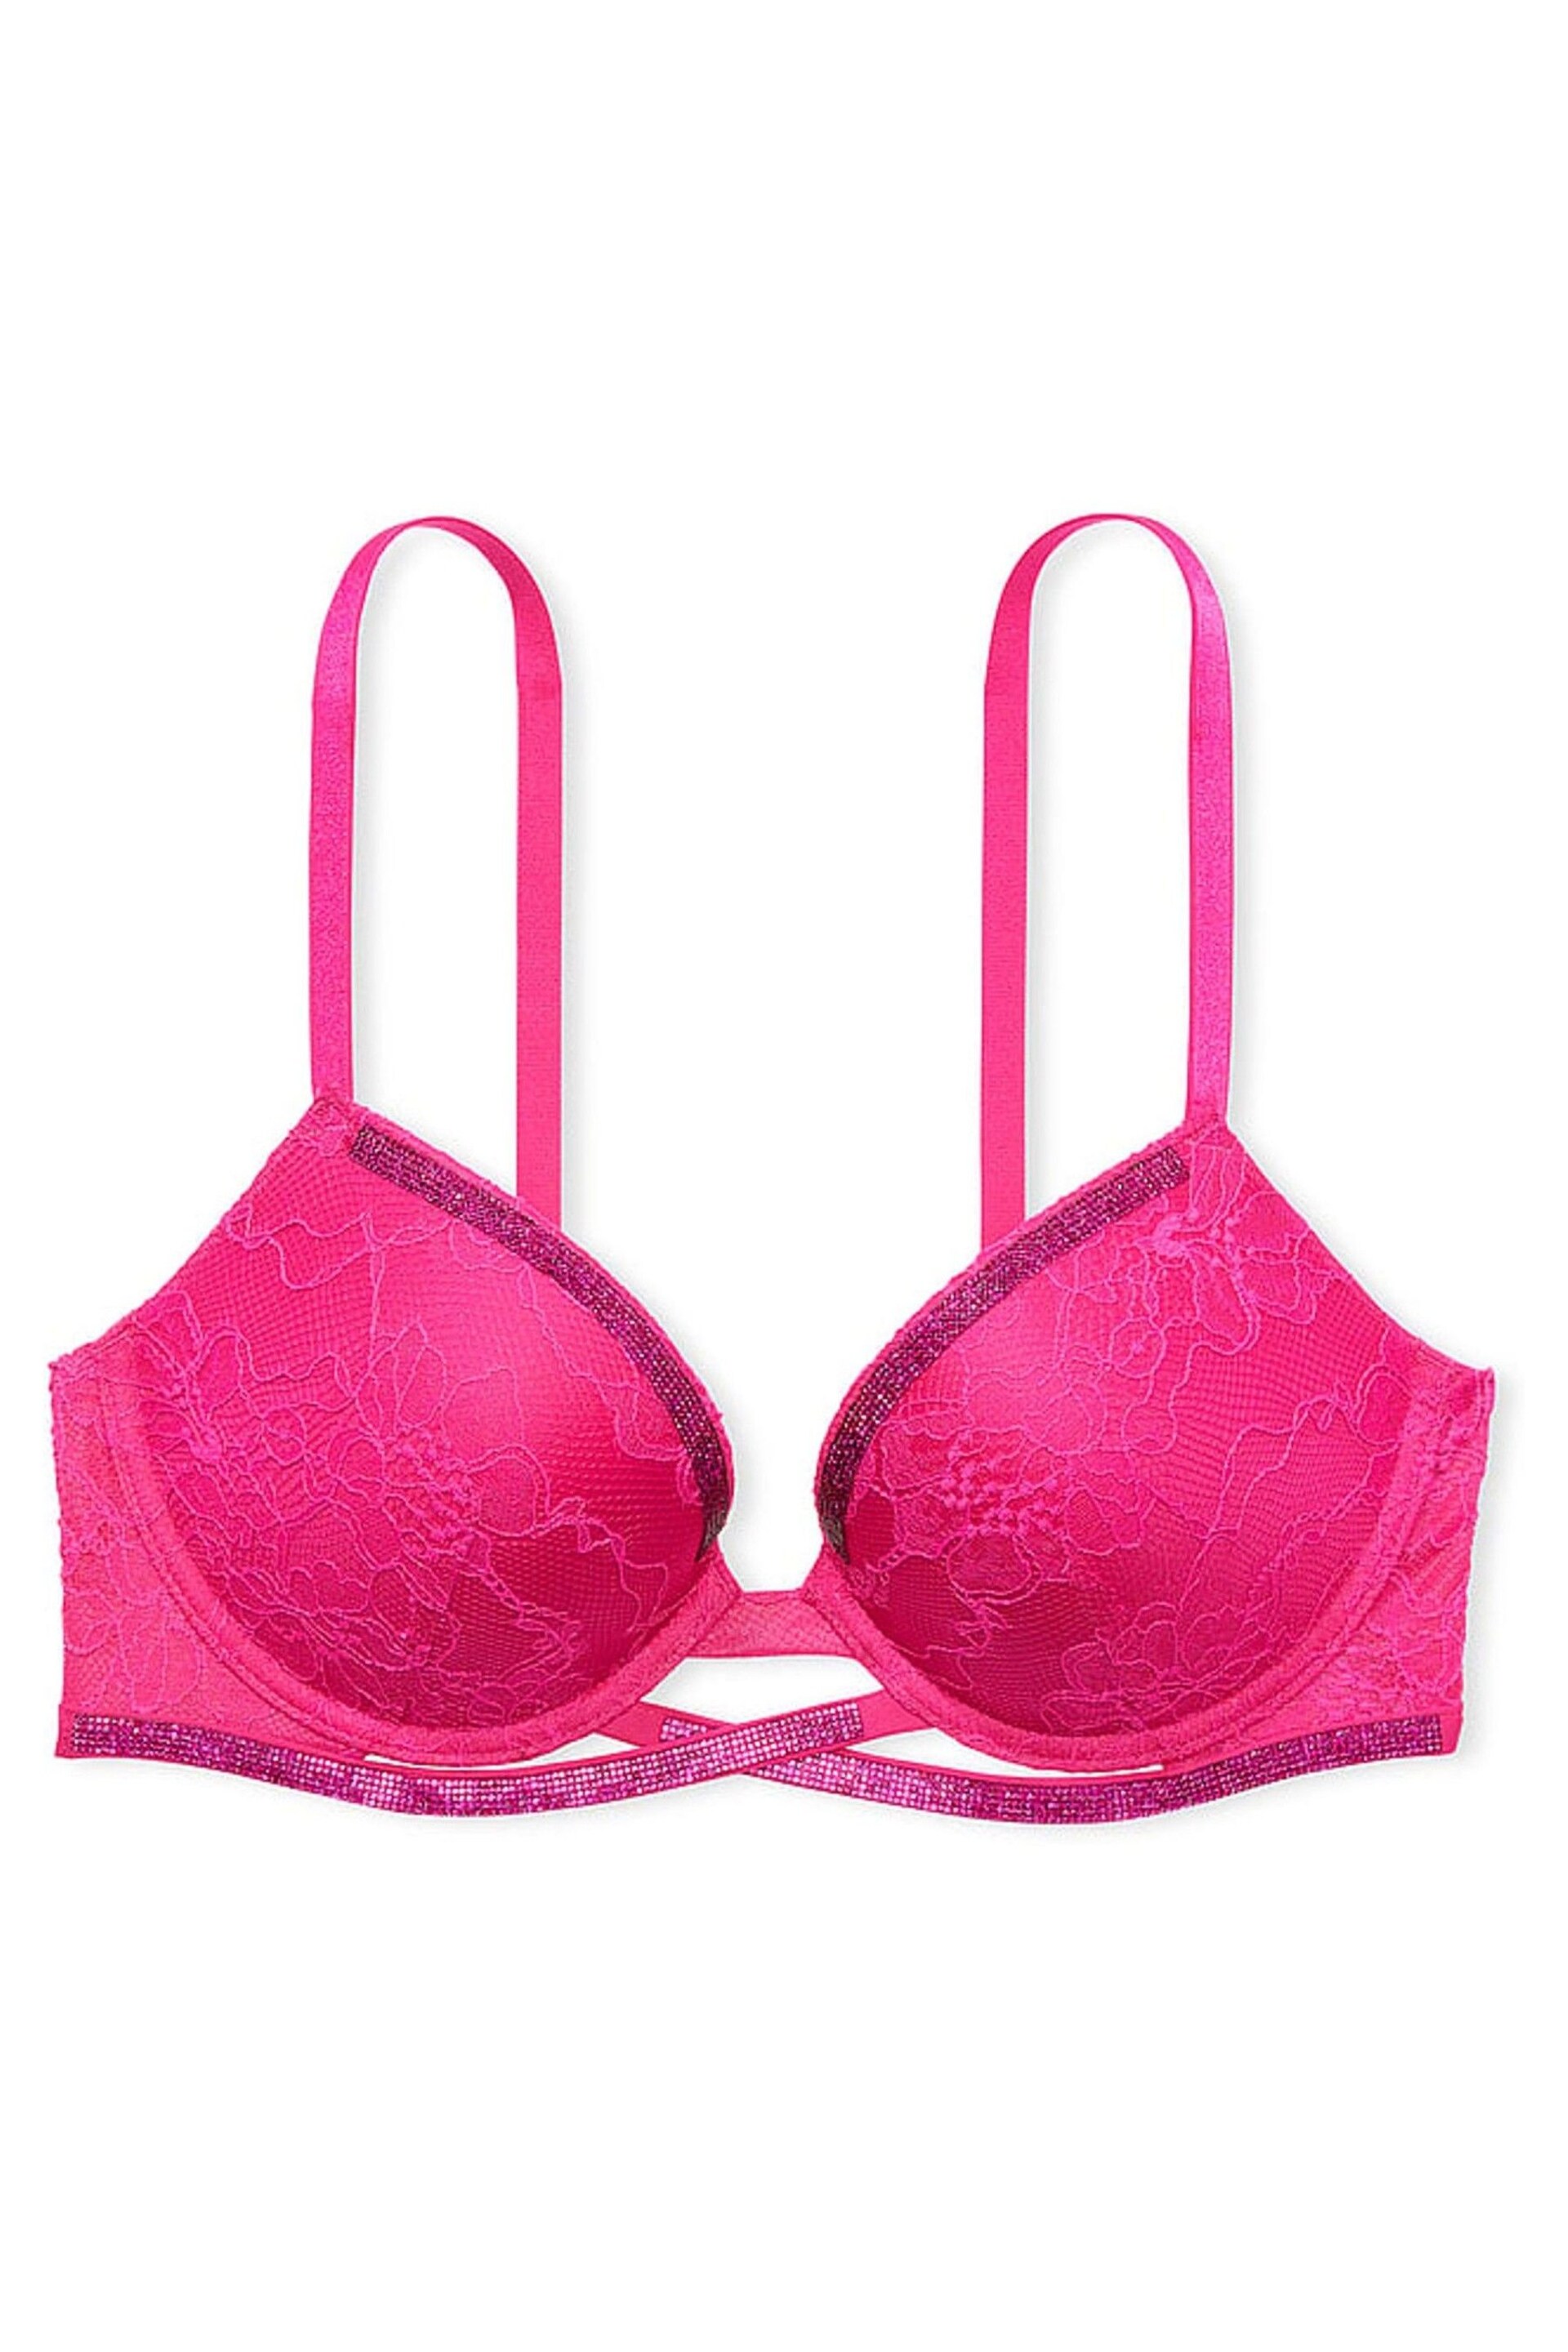 Victoria's Secret Forever Pink Lace Ouvert Shine Bra - Image 3 of 3